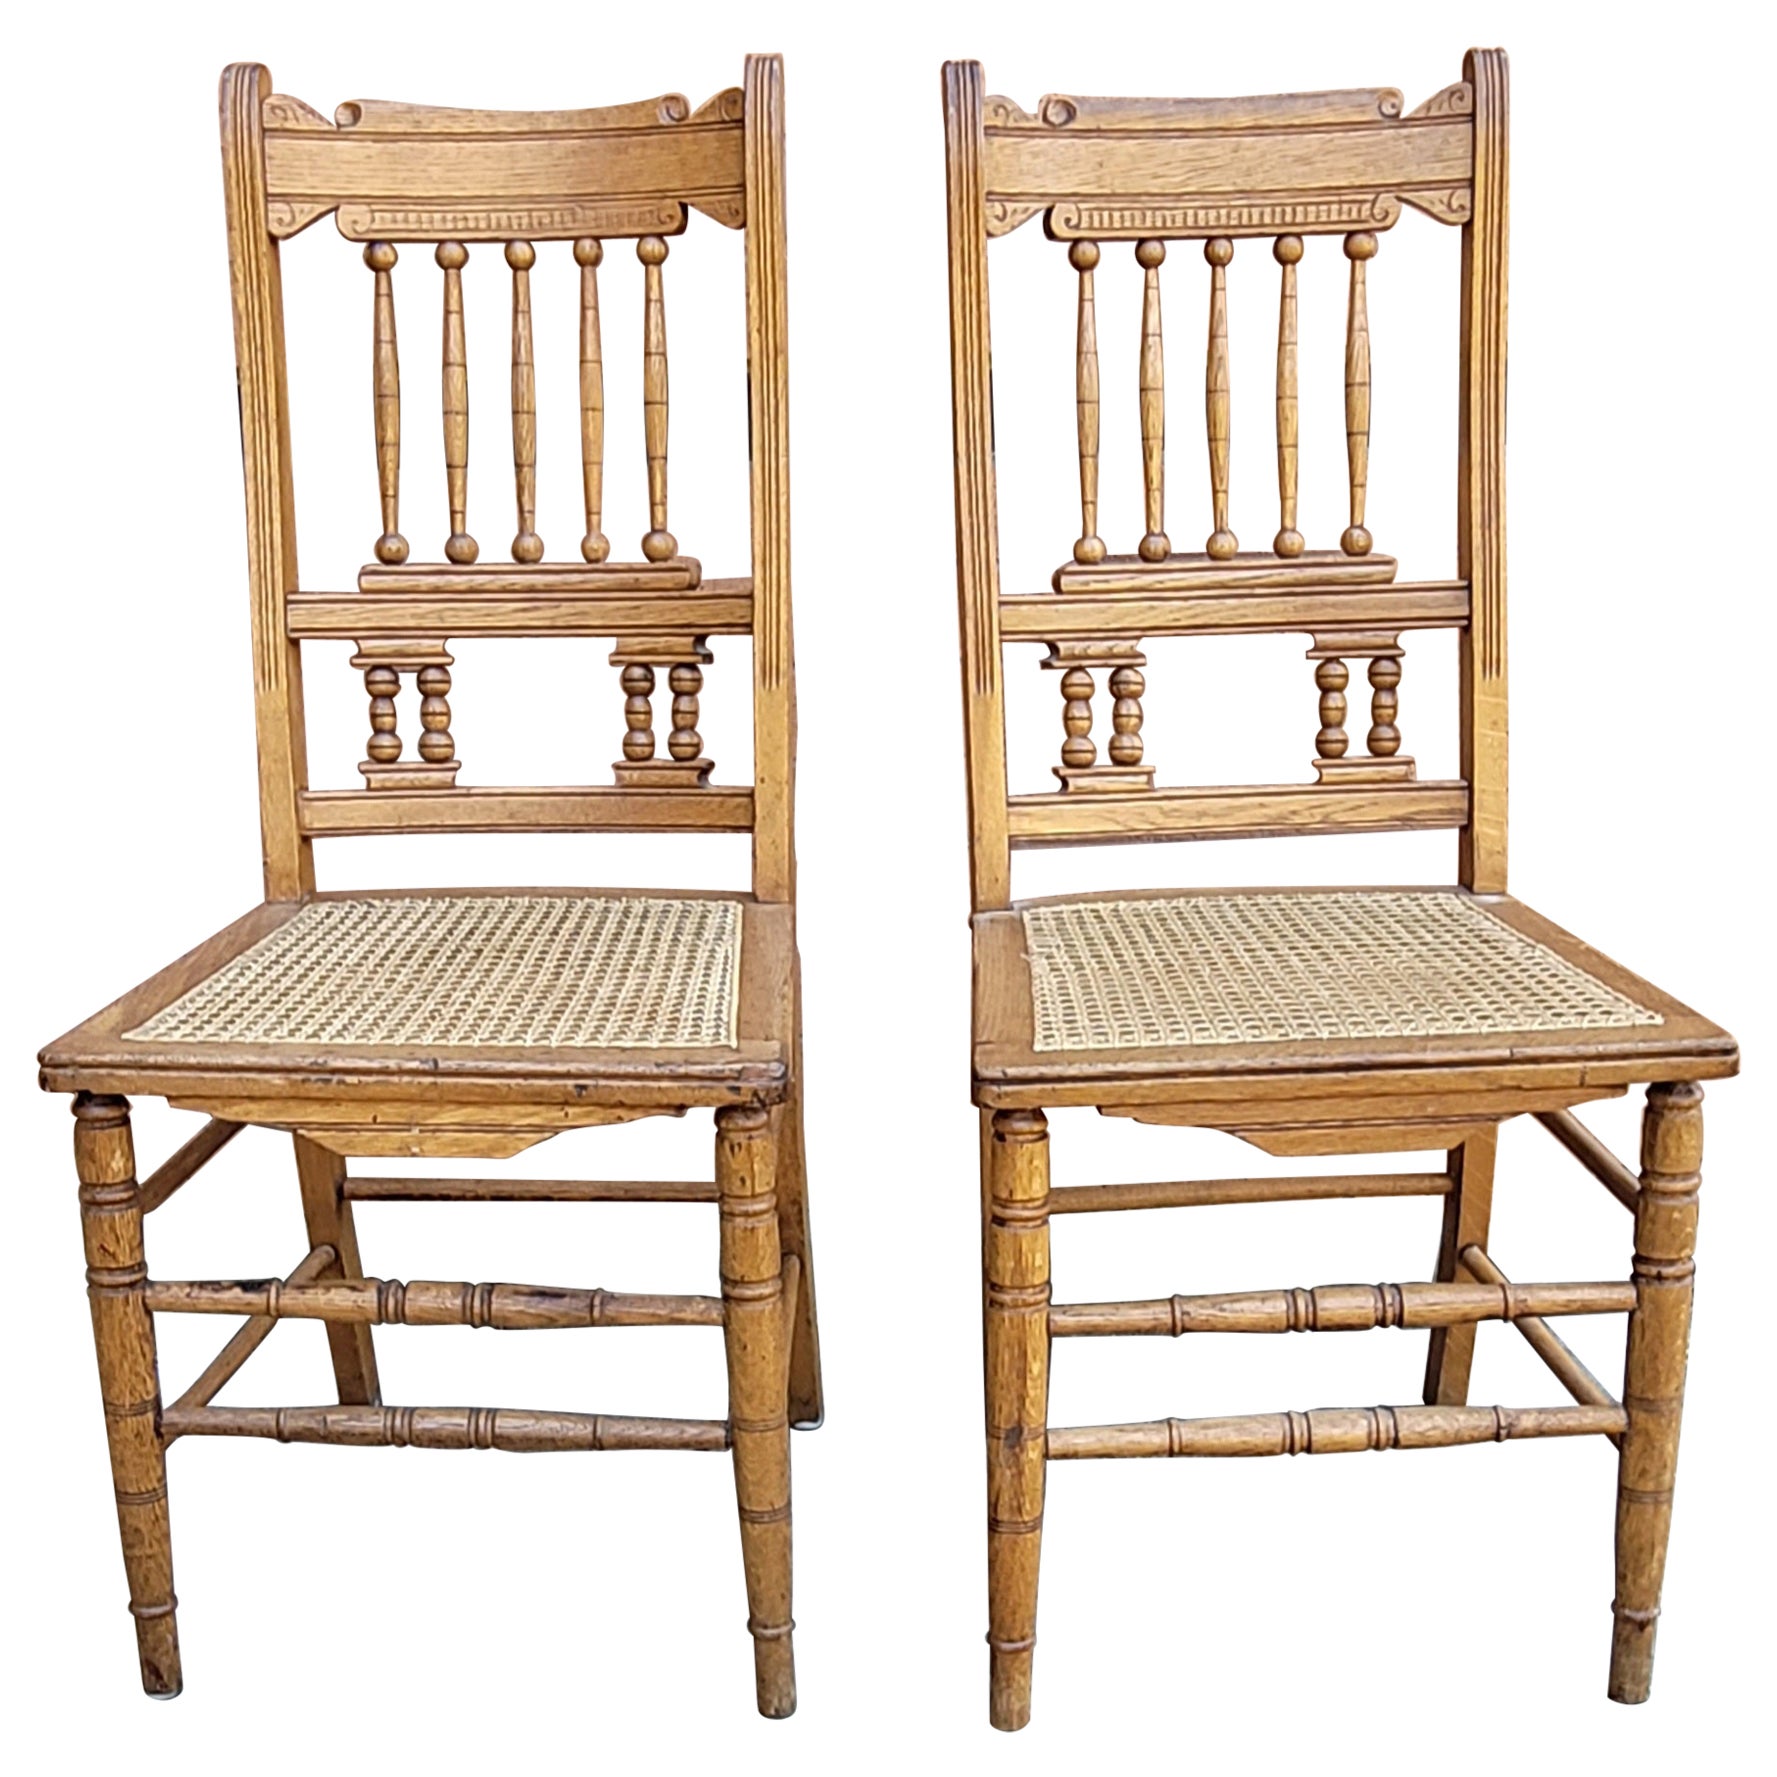 Early 20th C. French Henry II Oak and Canned Seat Side Chairs, a Pair For Sale